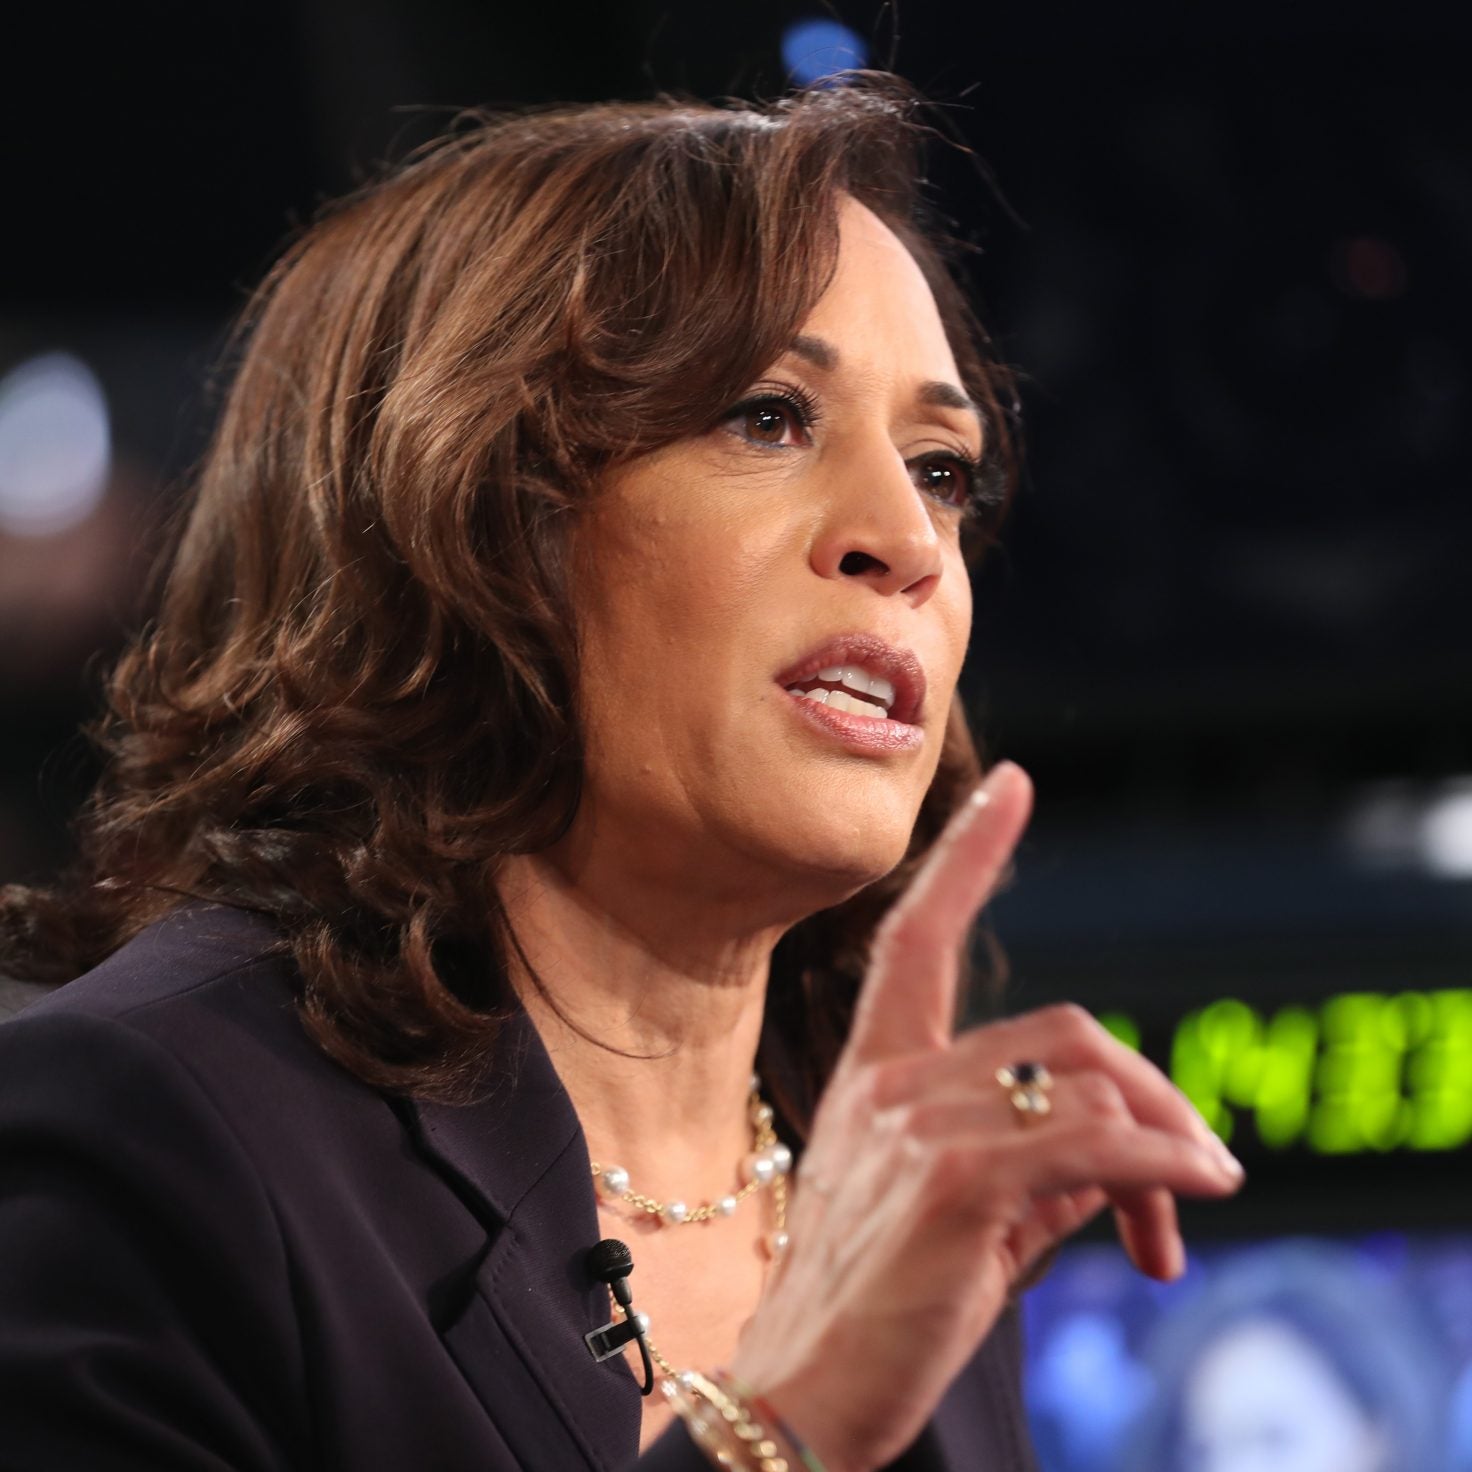 Kamala Harris Fields Questions About Her Stance On Busing